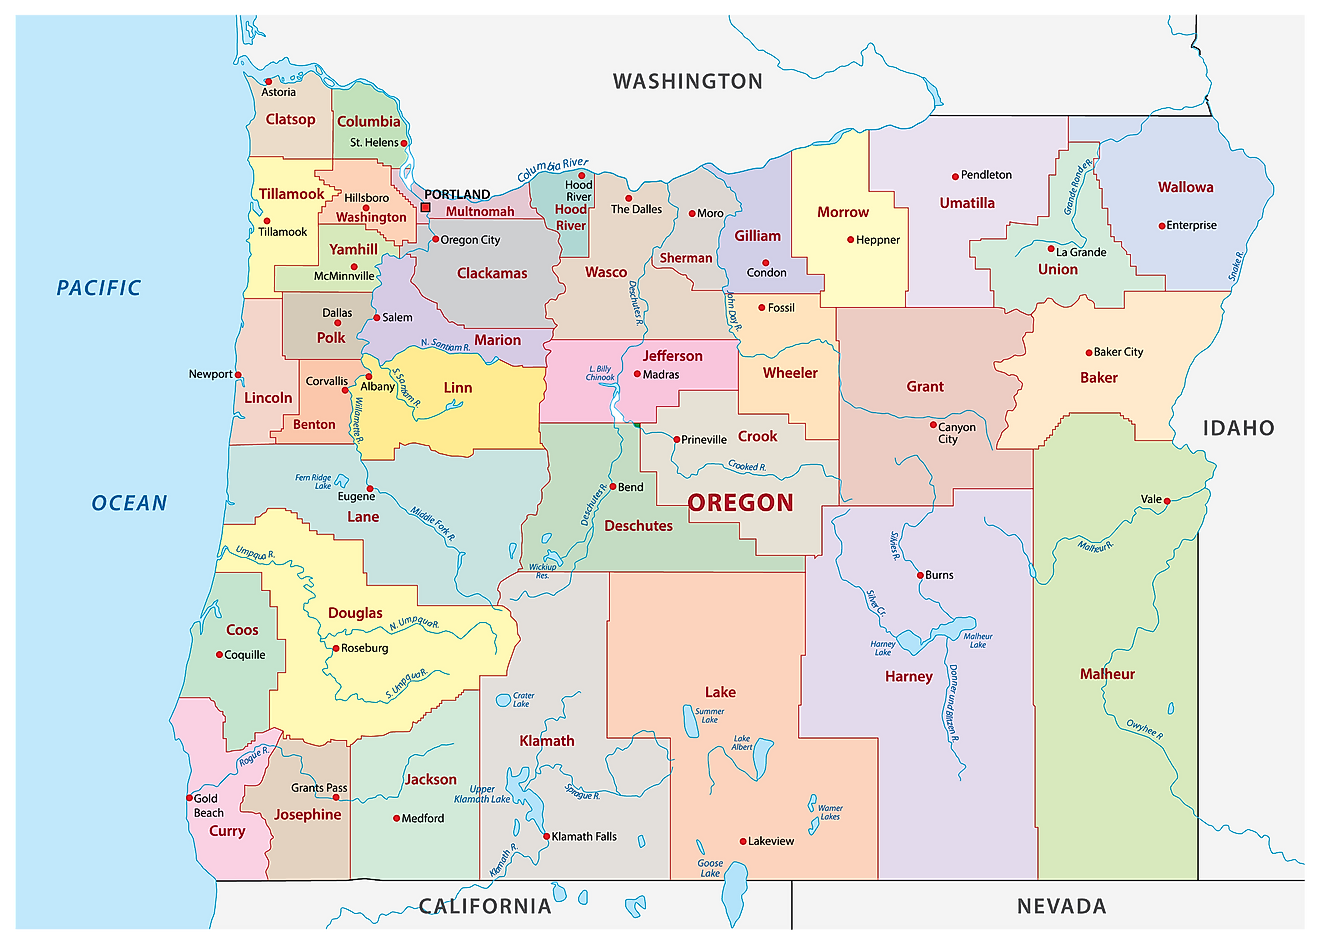 Administrative Map of Oregon showing its 36 counties and the capital city - Salem